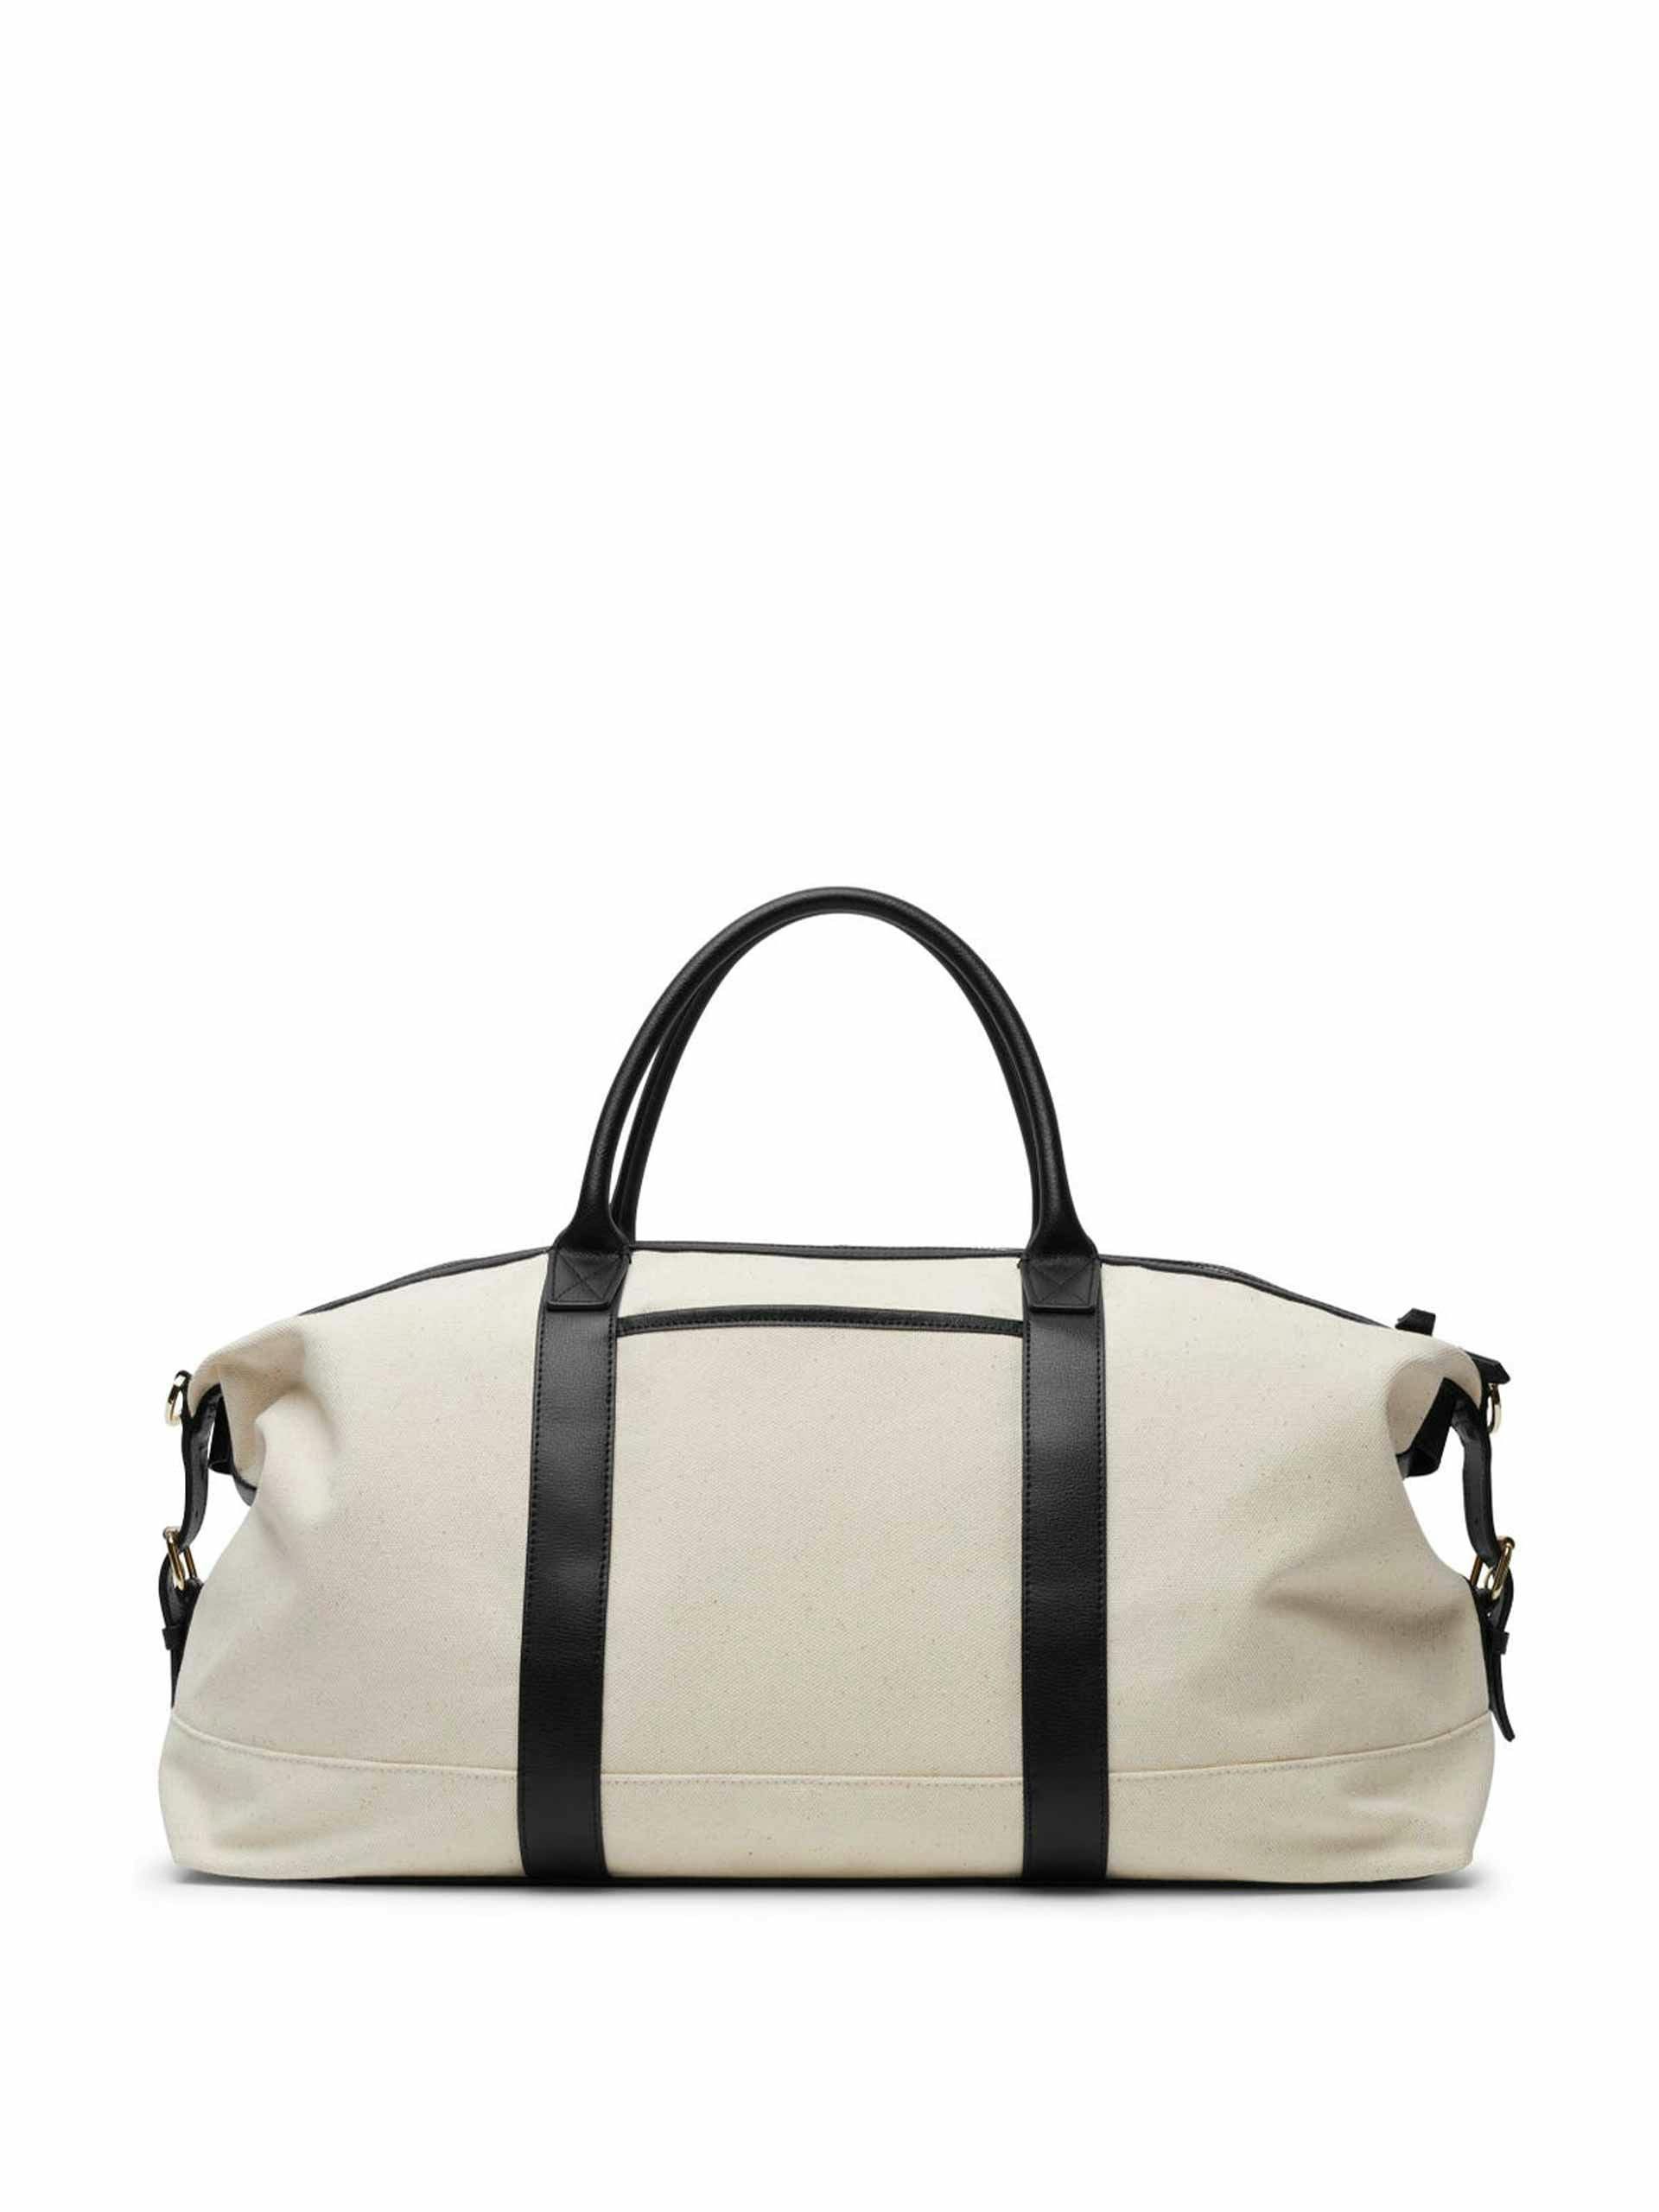 Black leather lined canvas duffle bag